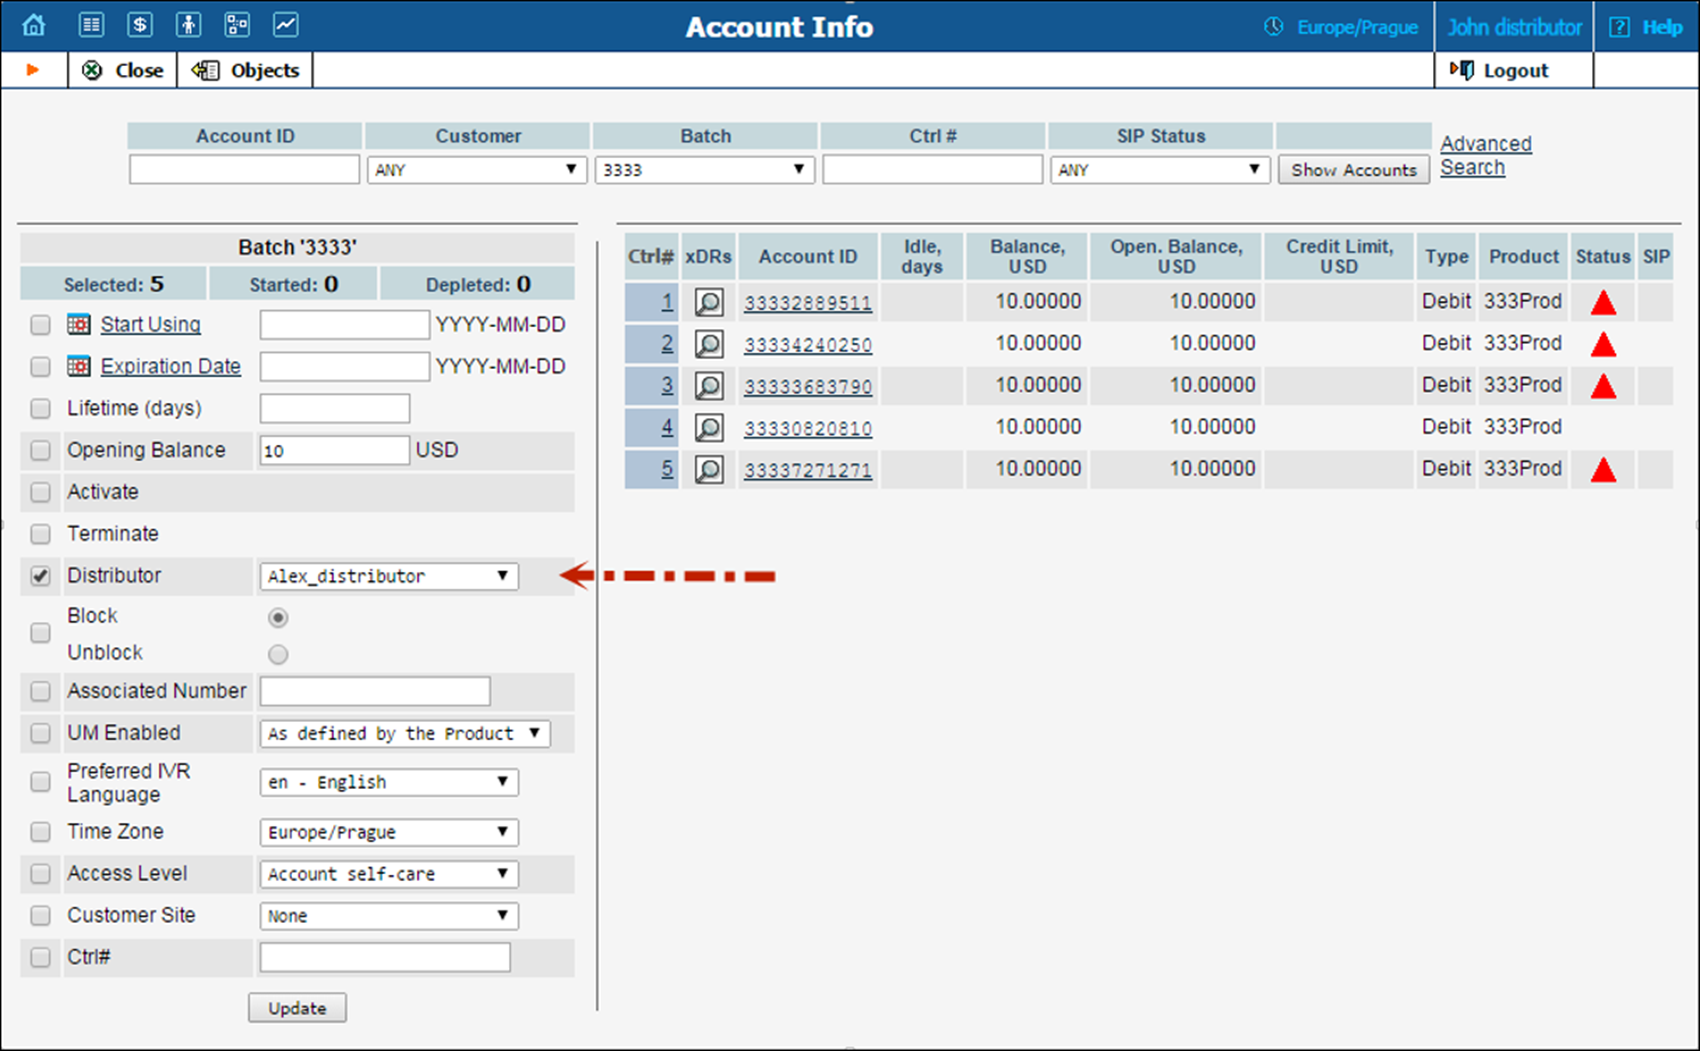 Assign accounts to the subdistributor 